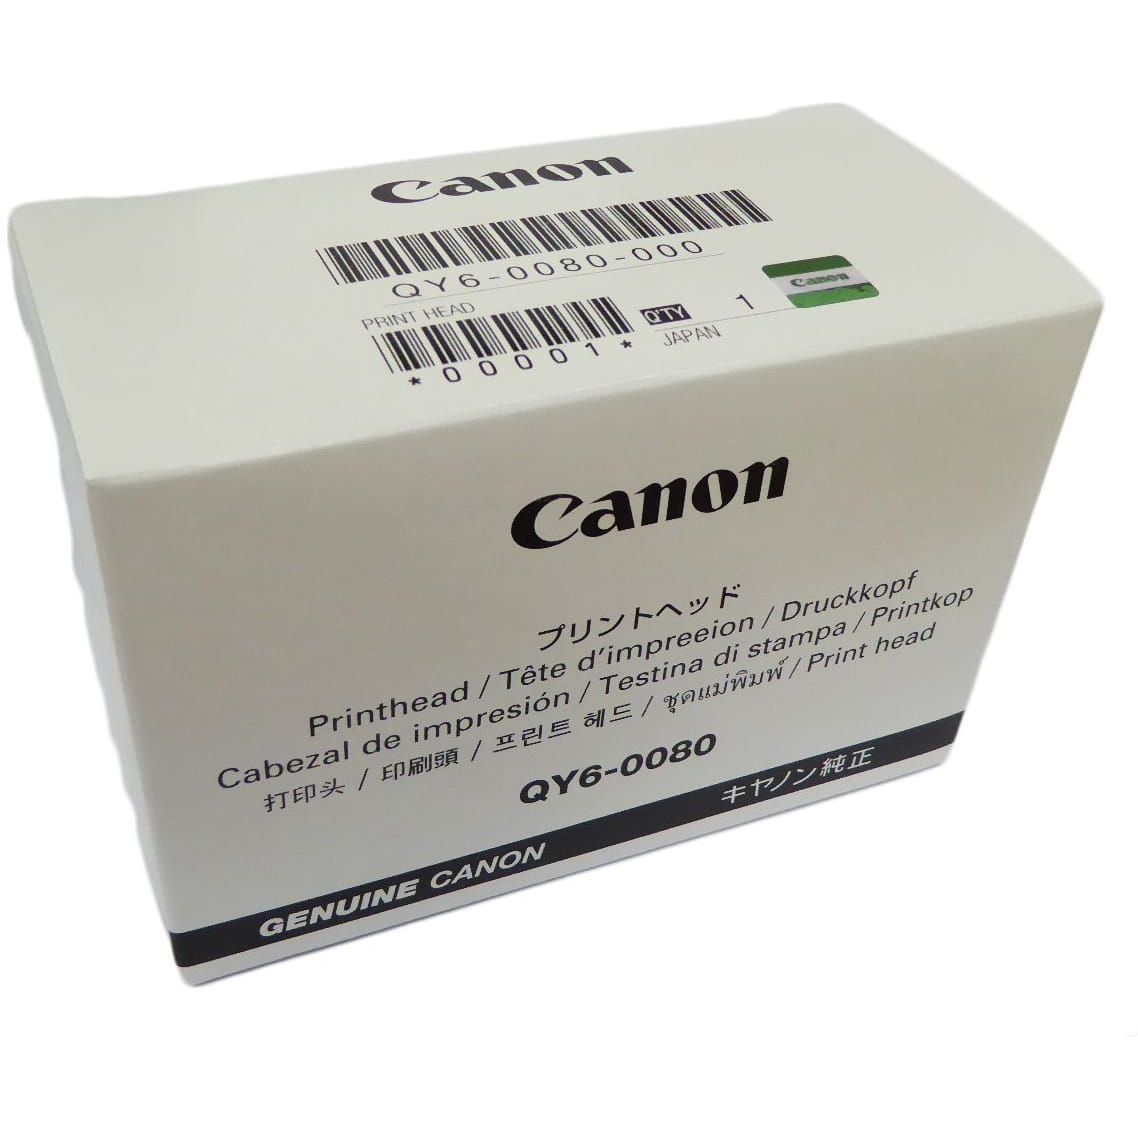 Buy Print Head Canon QY6-0080 — in the best online store of